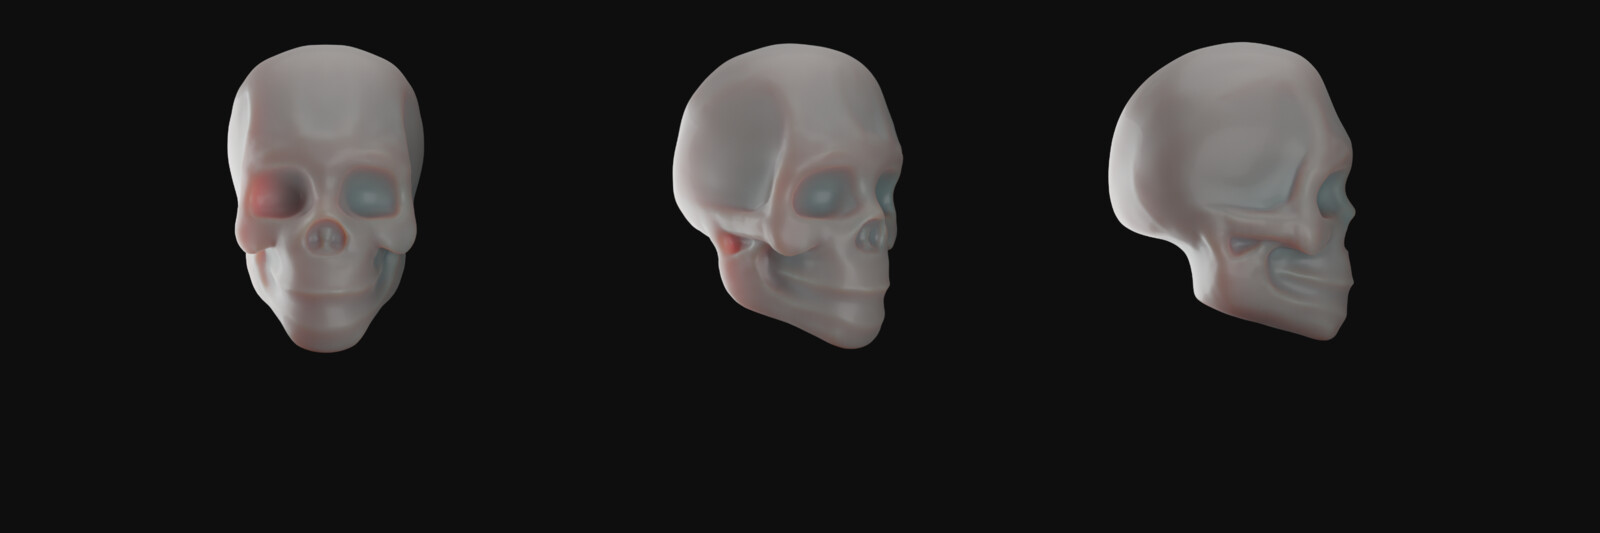 Starting off with an anatomically okaaay skull.